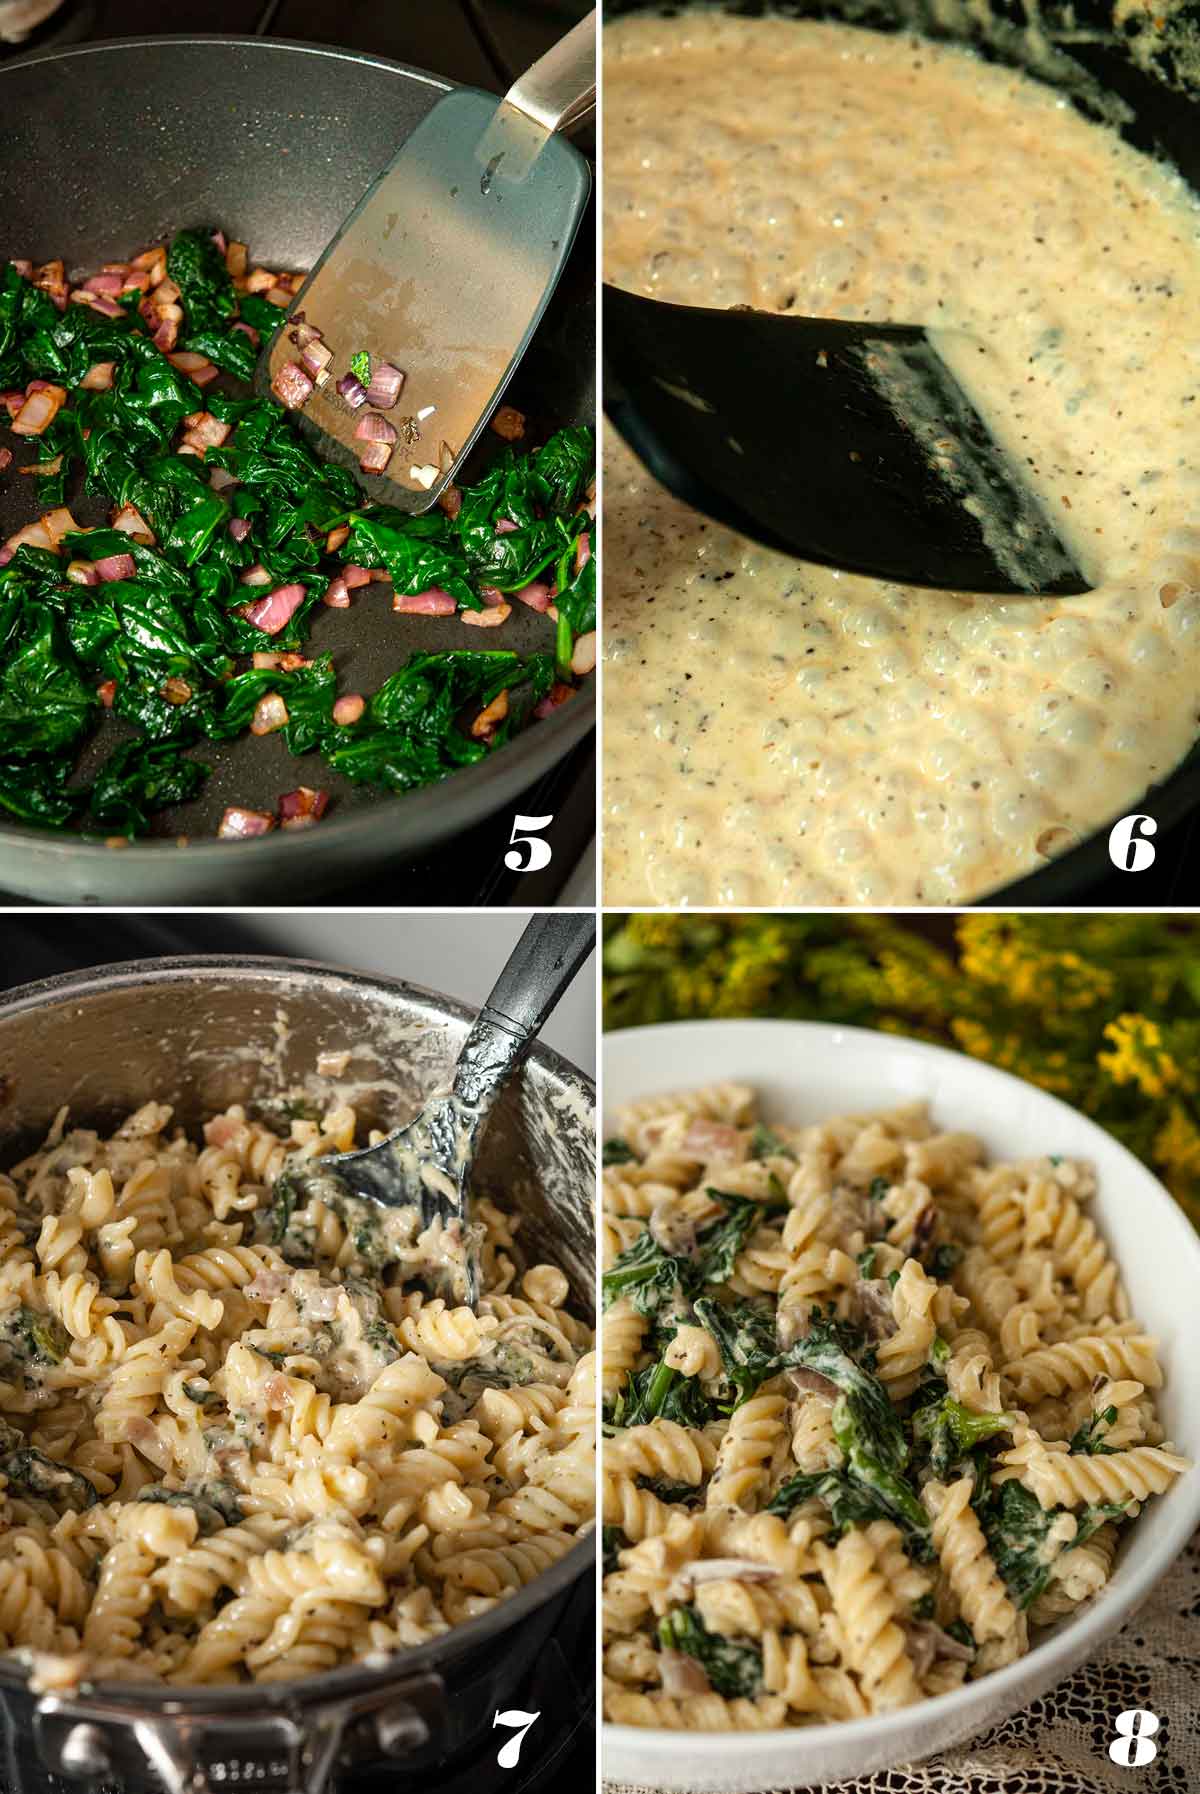 A collage of 4 numbered images showing how to make tuscan pasta.